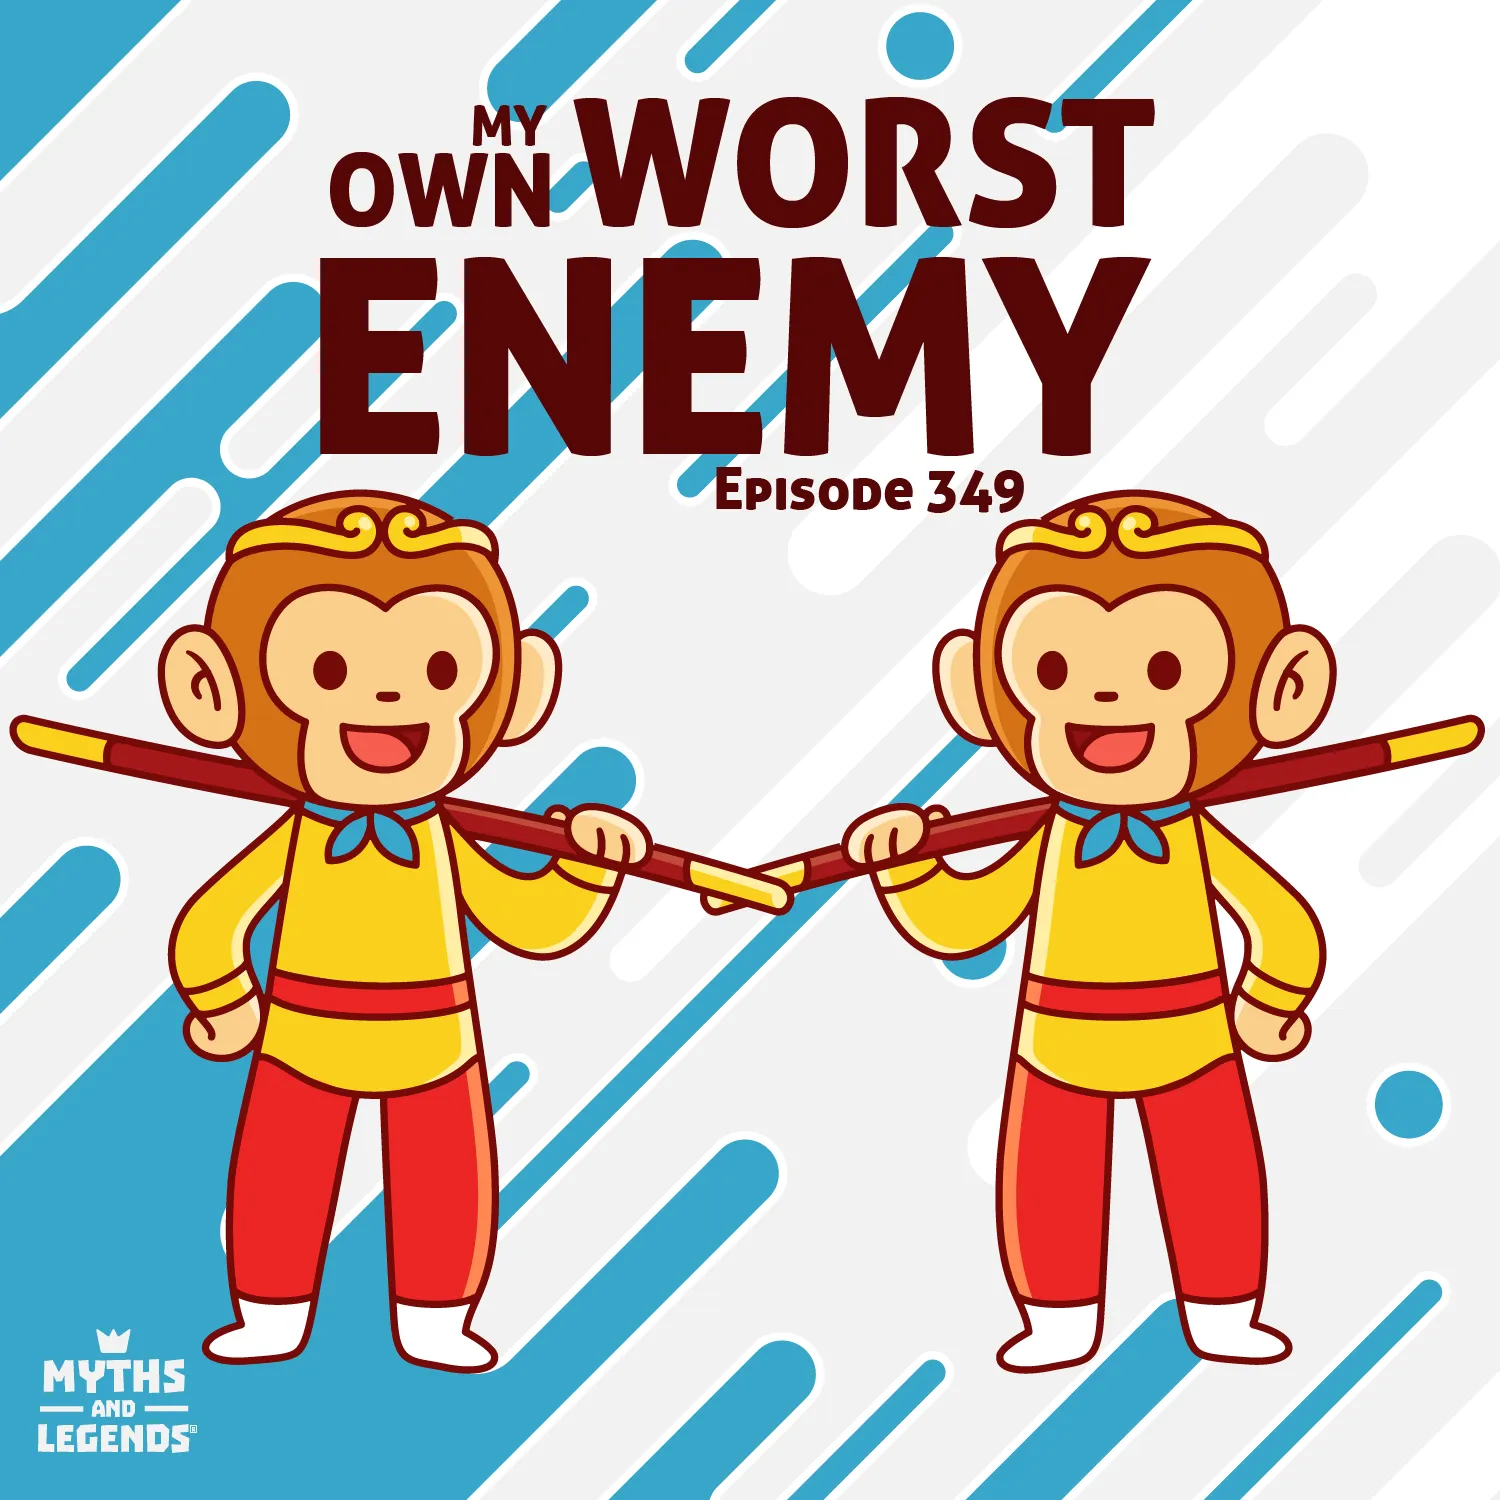 The image is a graphic with a cartoon theme featuring two identical monkey characters (Sun Wukong). They are in a mirror image pose, each holding a long stick across their shoulders with both hands. The monkeys have cheerful expressions and are styled in a simple, flat graphic design. They wear yellow shirts with a blue neckline, red pants, brown shoes, and each have a golden headband. Behind them, there are blue and white diagonal stripes that give the impression of motion or action. At the top, in bold, block lettering, is the phrase "MY OWN WORST ENEMY," and beneath that in smaller text is "Episode 349."